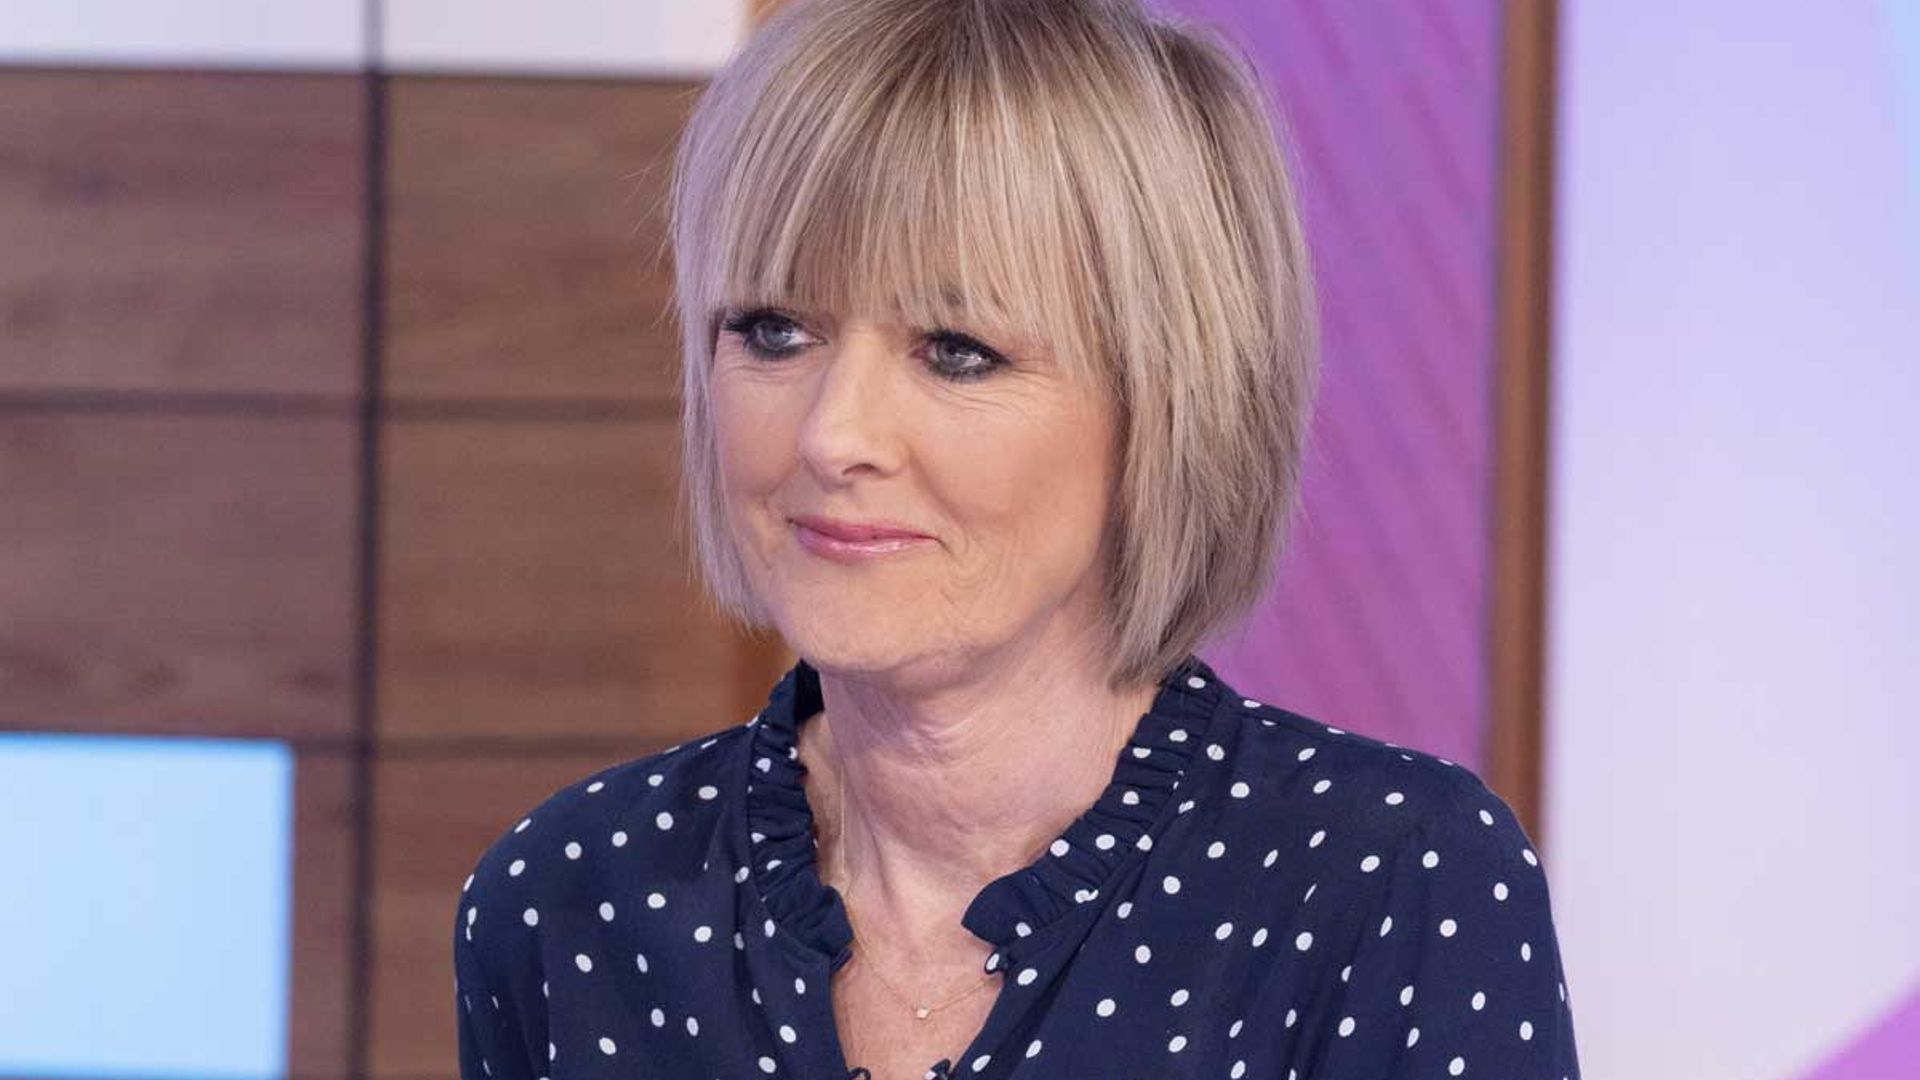 Jane Moore’s polka dot jumpsuit is an M&S must-have